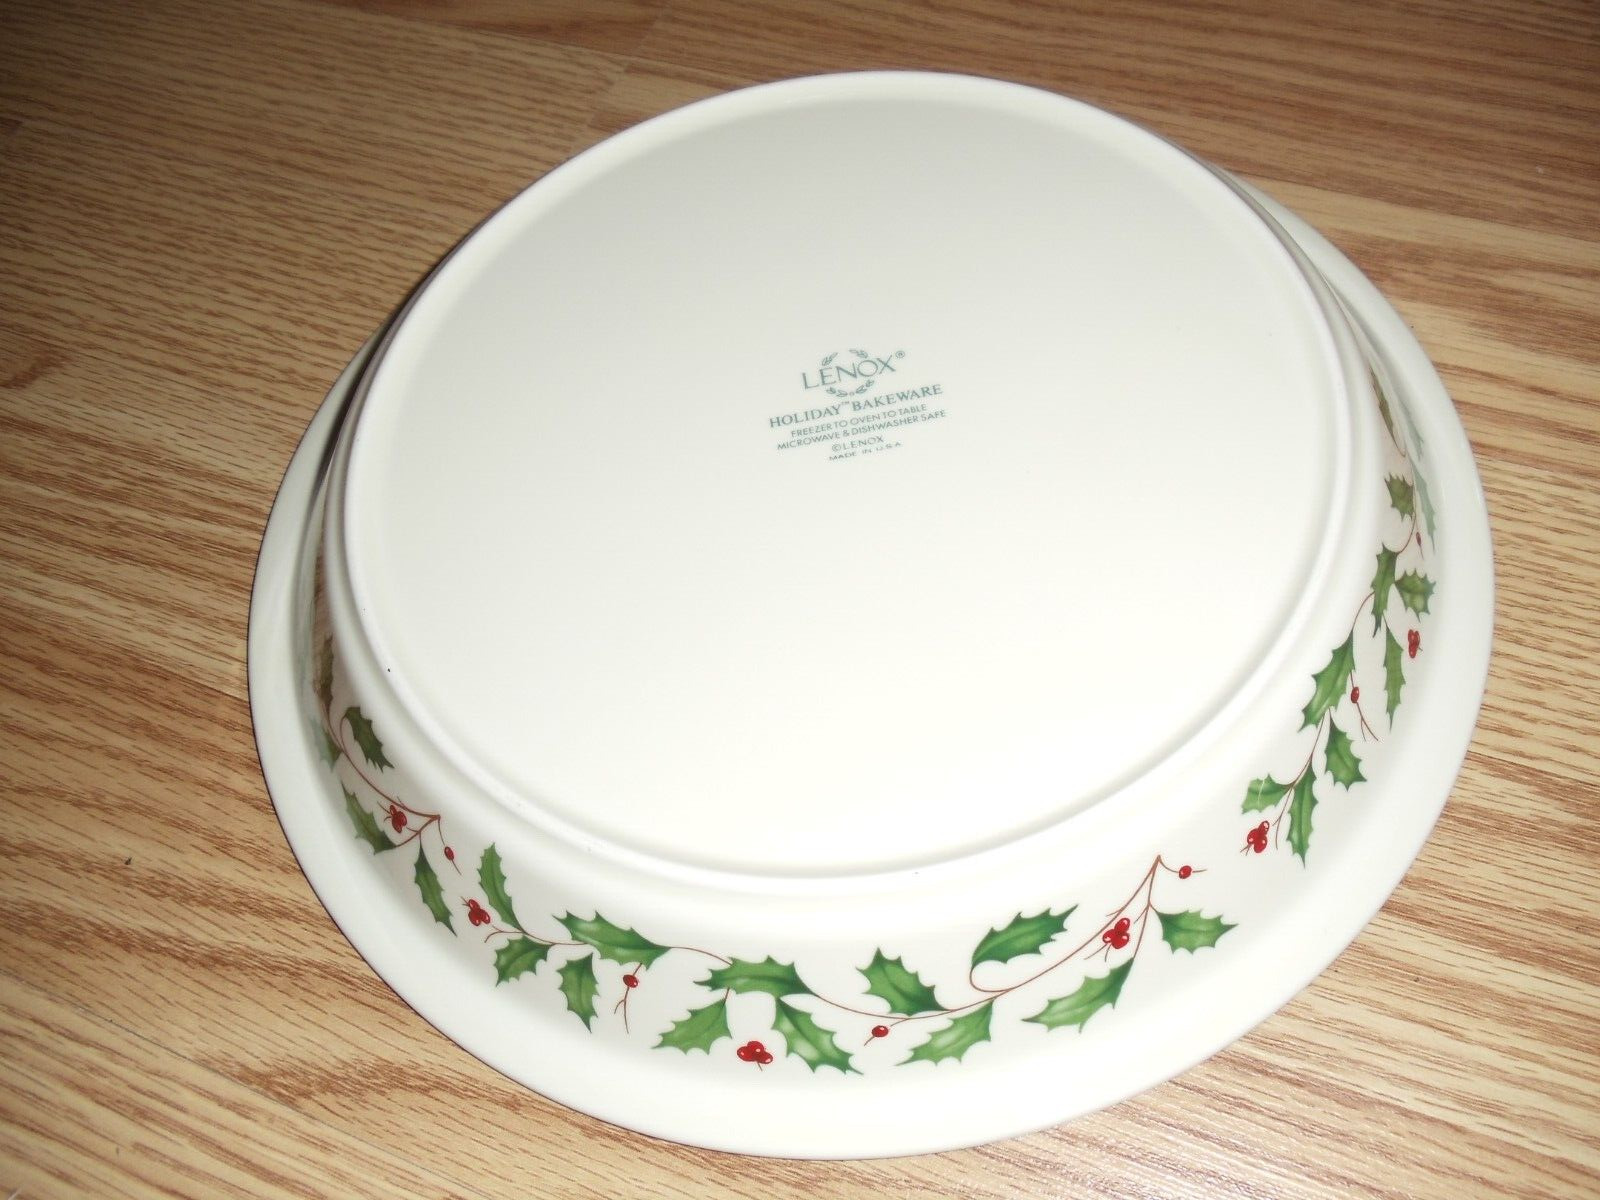 Lenox Holiday Bakeware Dimension Collection Christmas Baking Pie Plate Dish USA